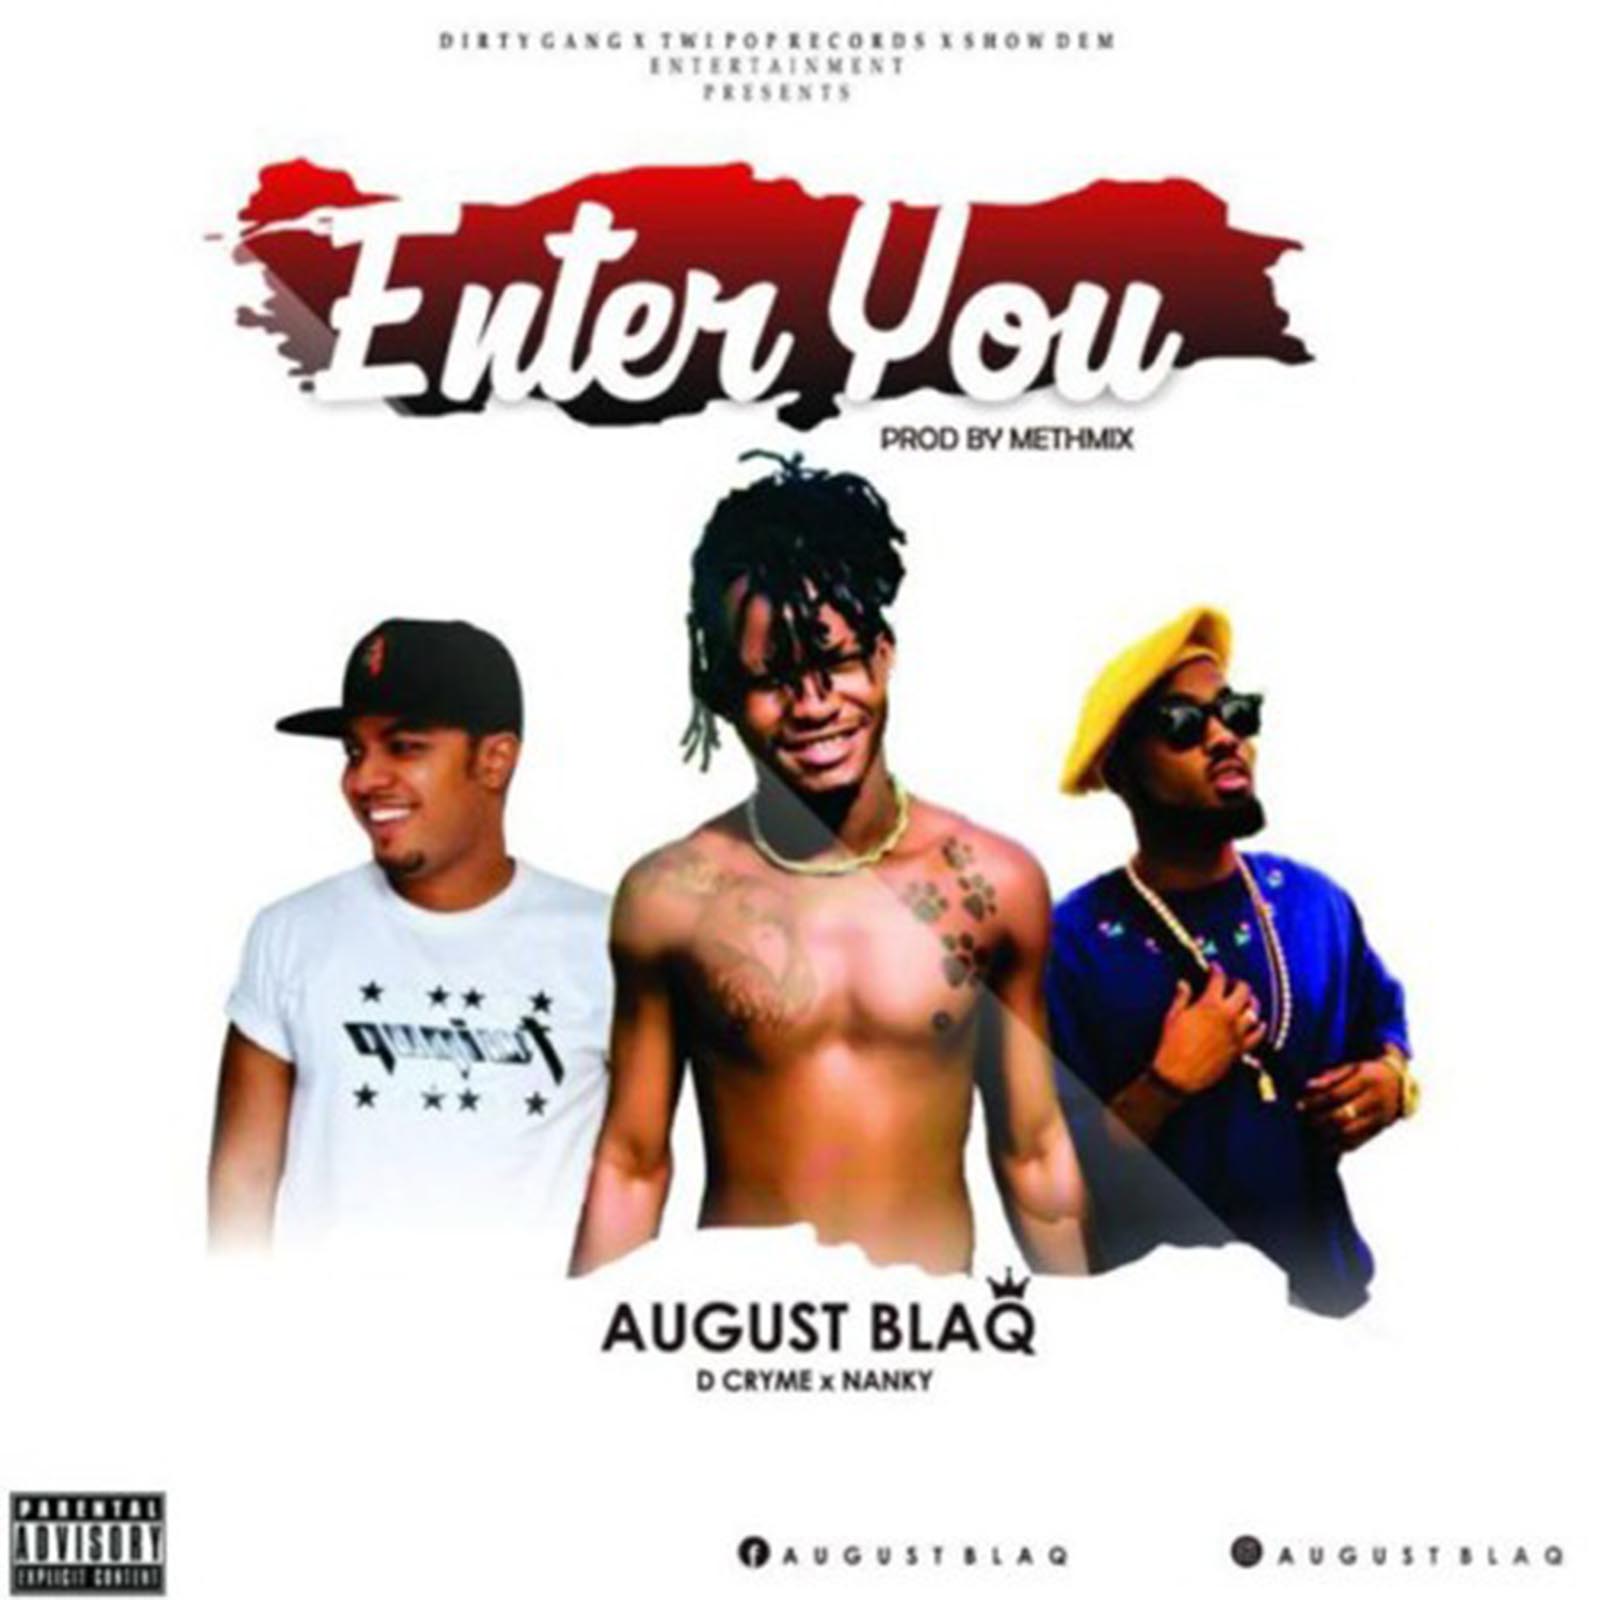 Enter You by August Blaq feat. D-Cryme & Nankey